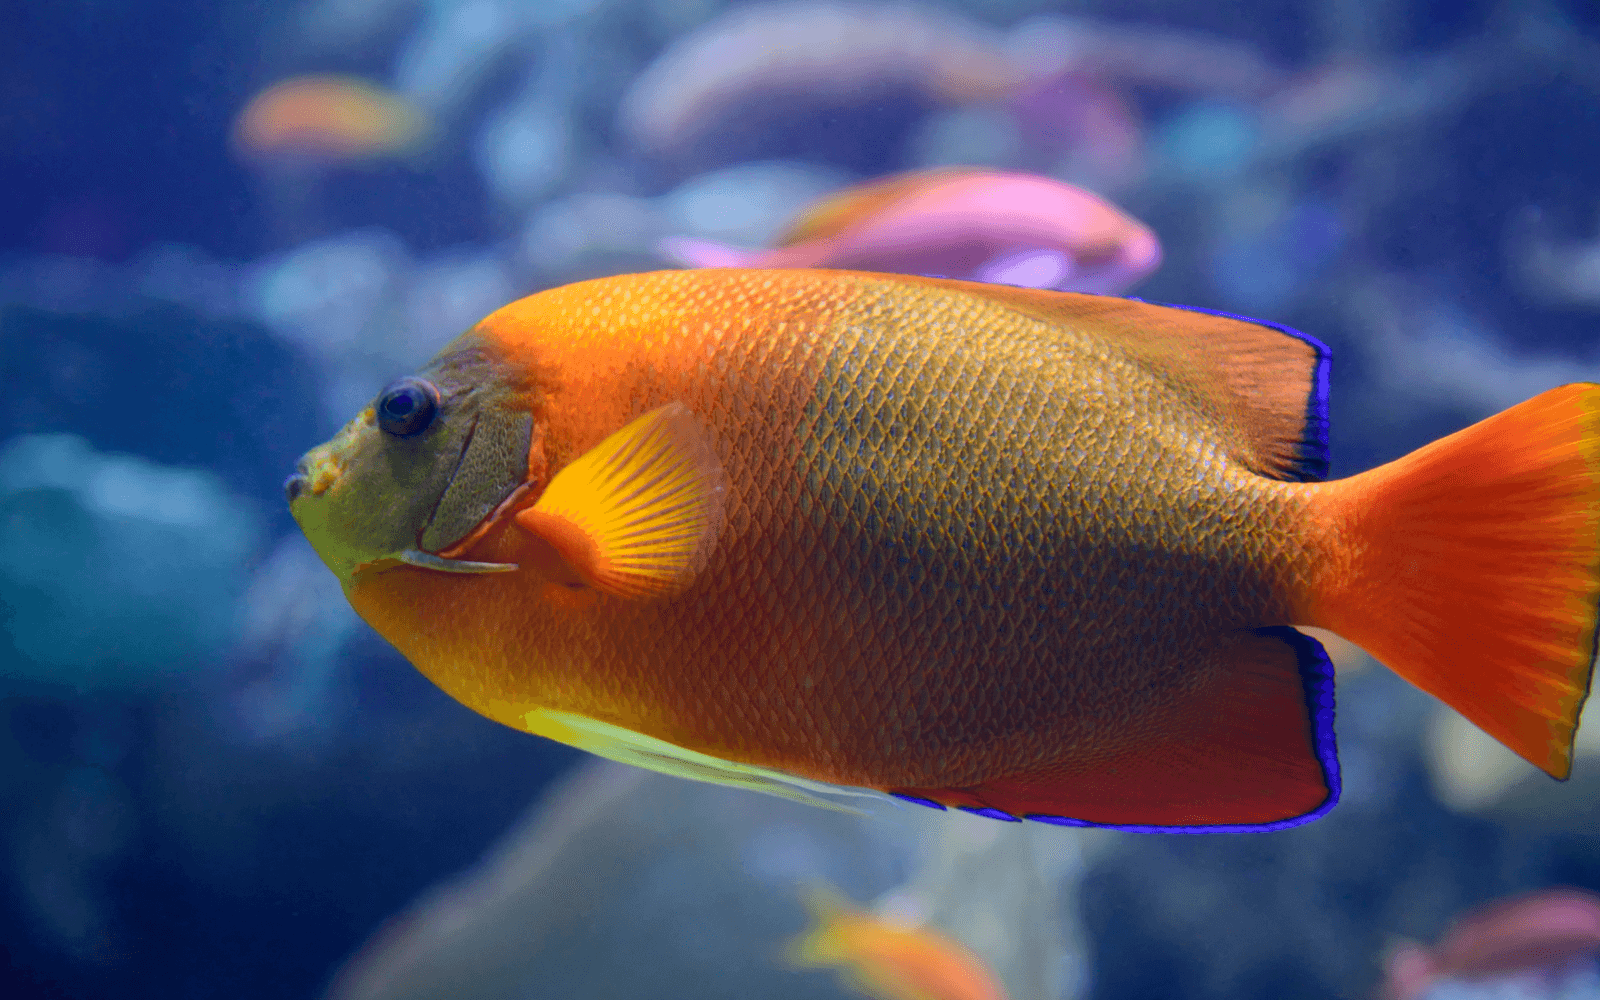 An image of the clarion angelfish